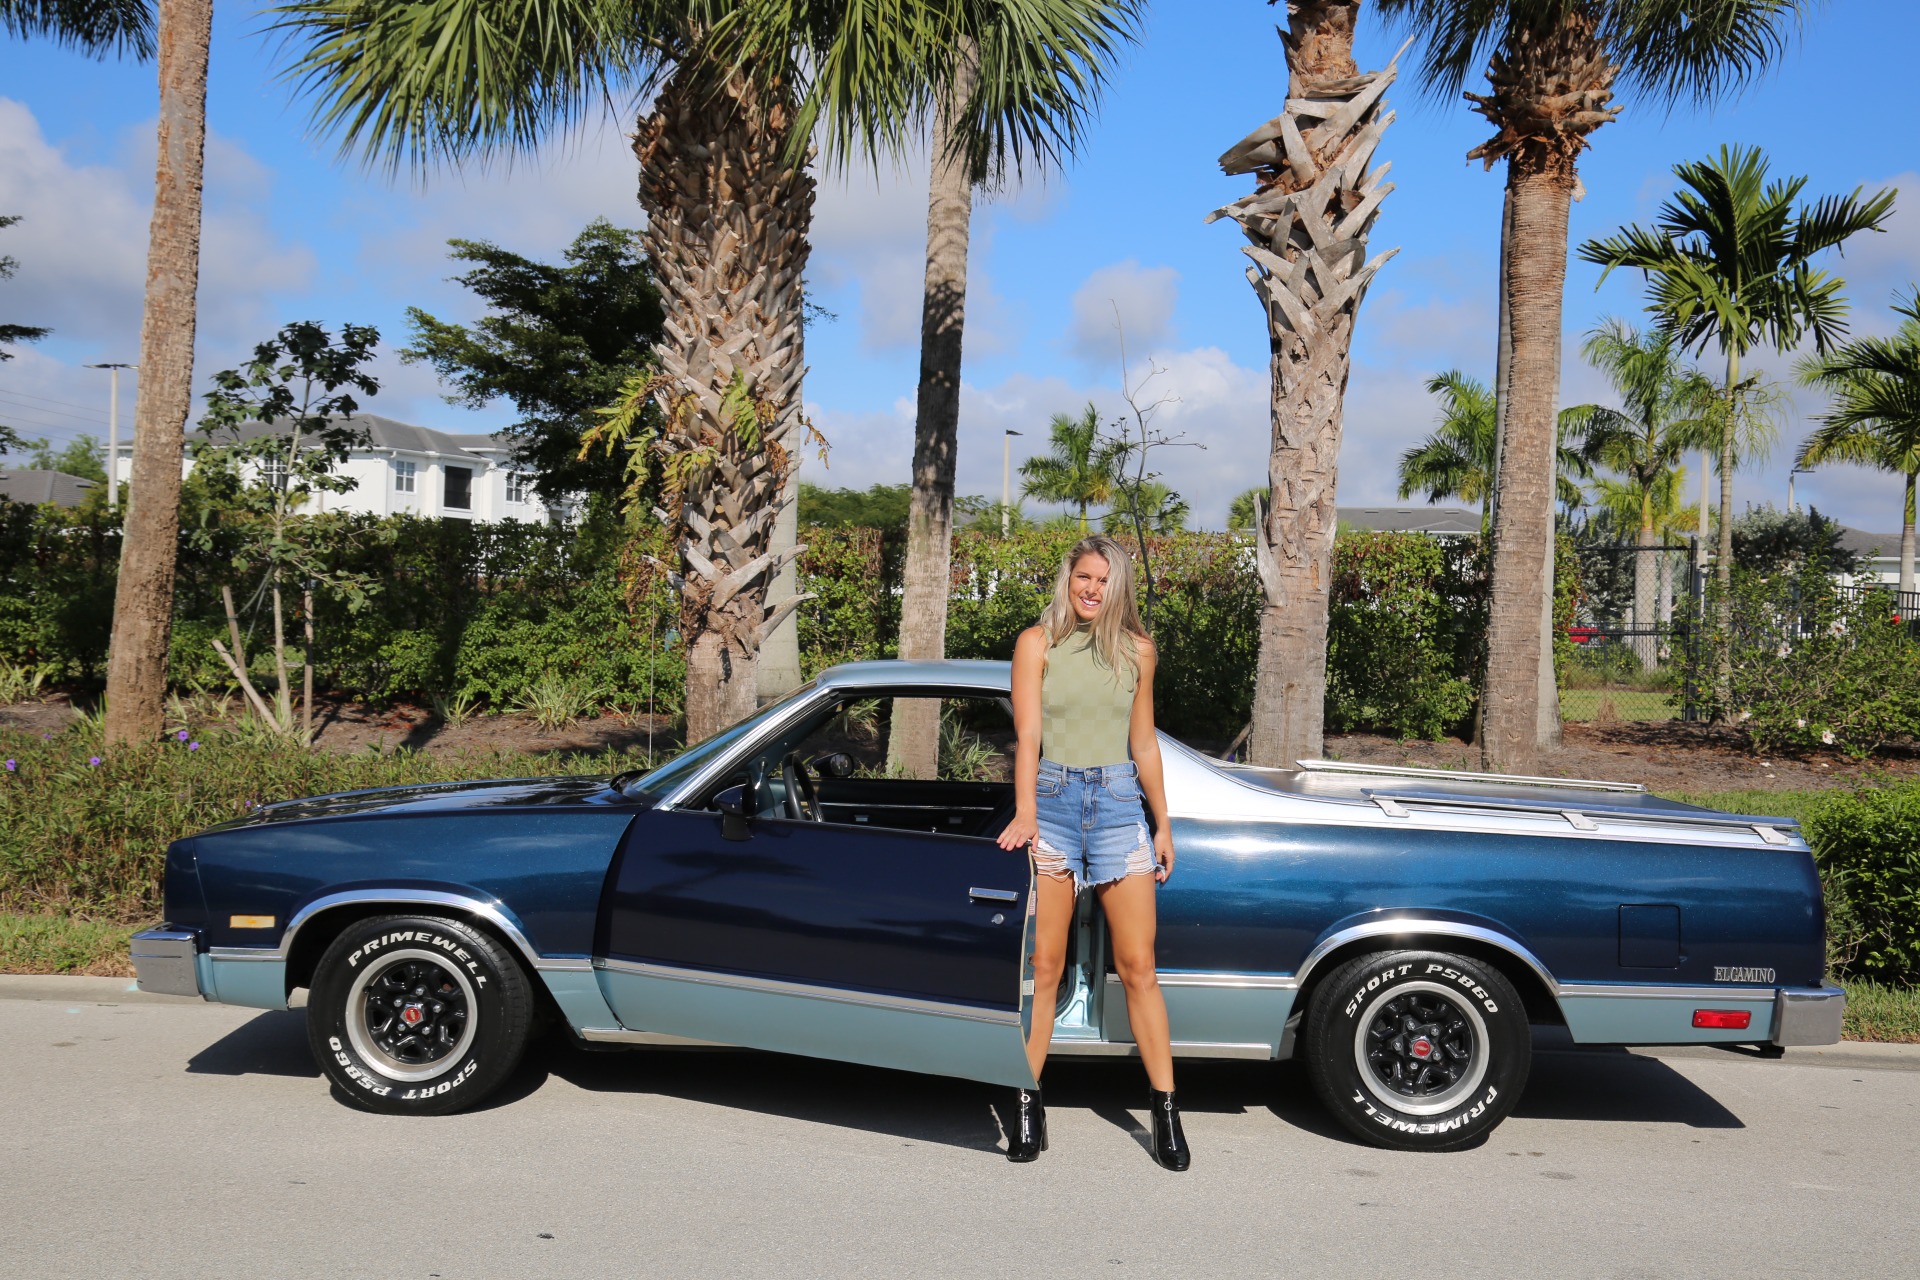 Used 1985 Chevrolet El Camino SS for sale Sold at Muscle Cars for Sale Inc. in Fort Myers FL 33912 4